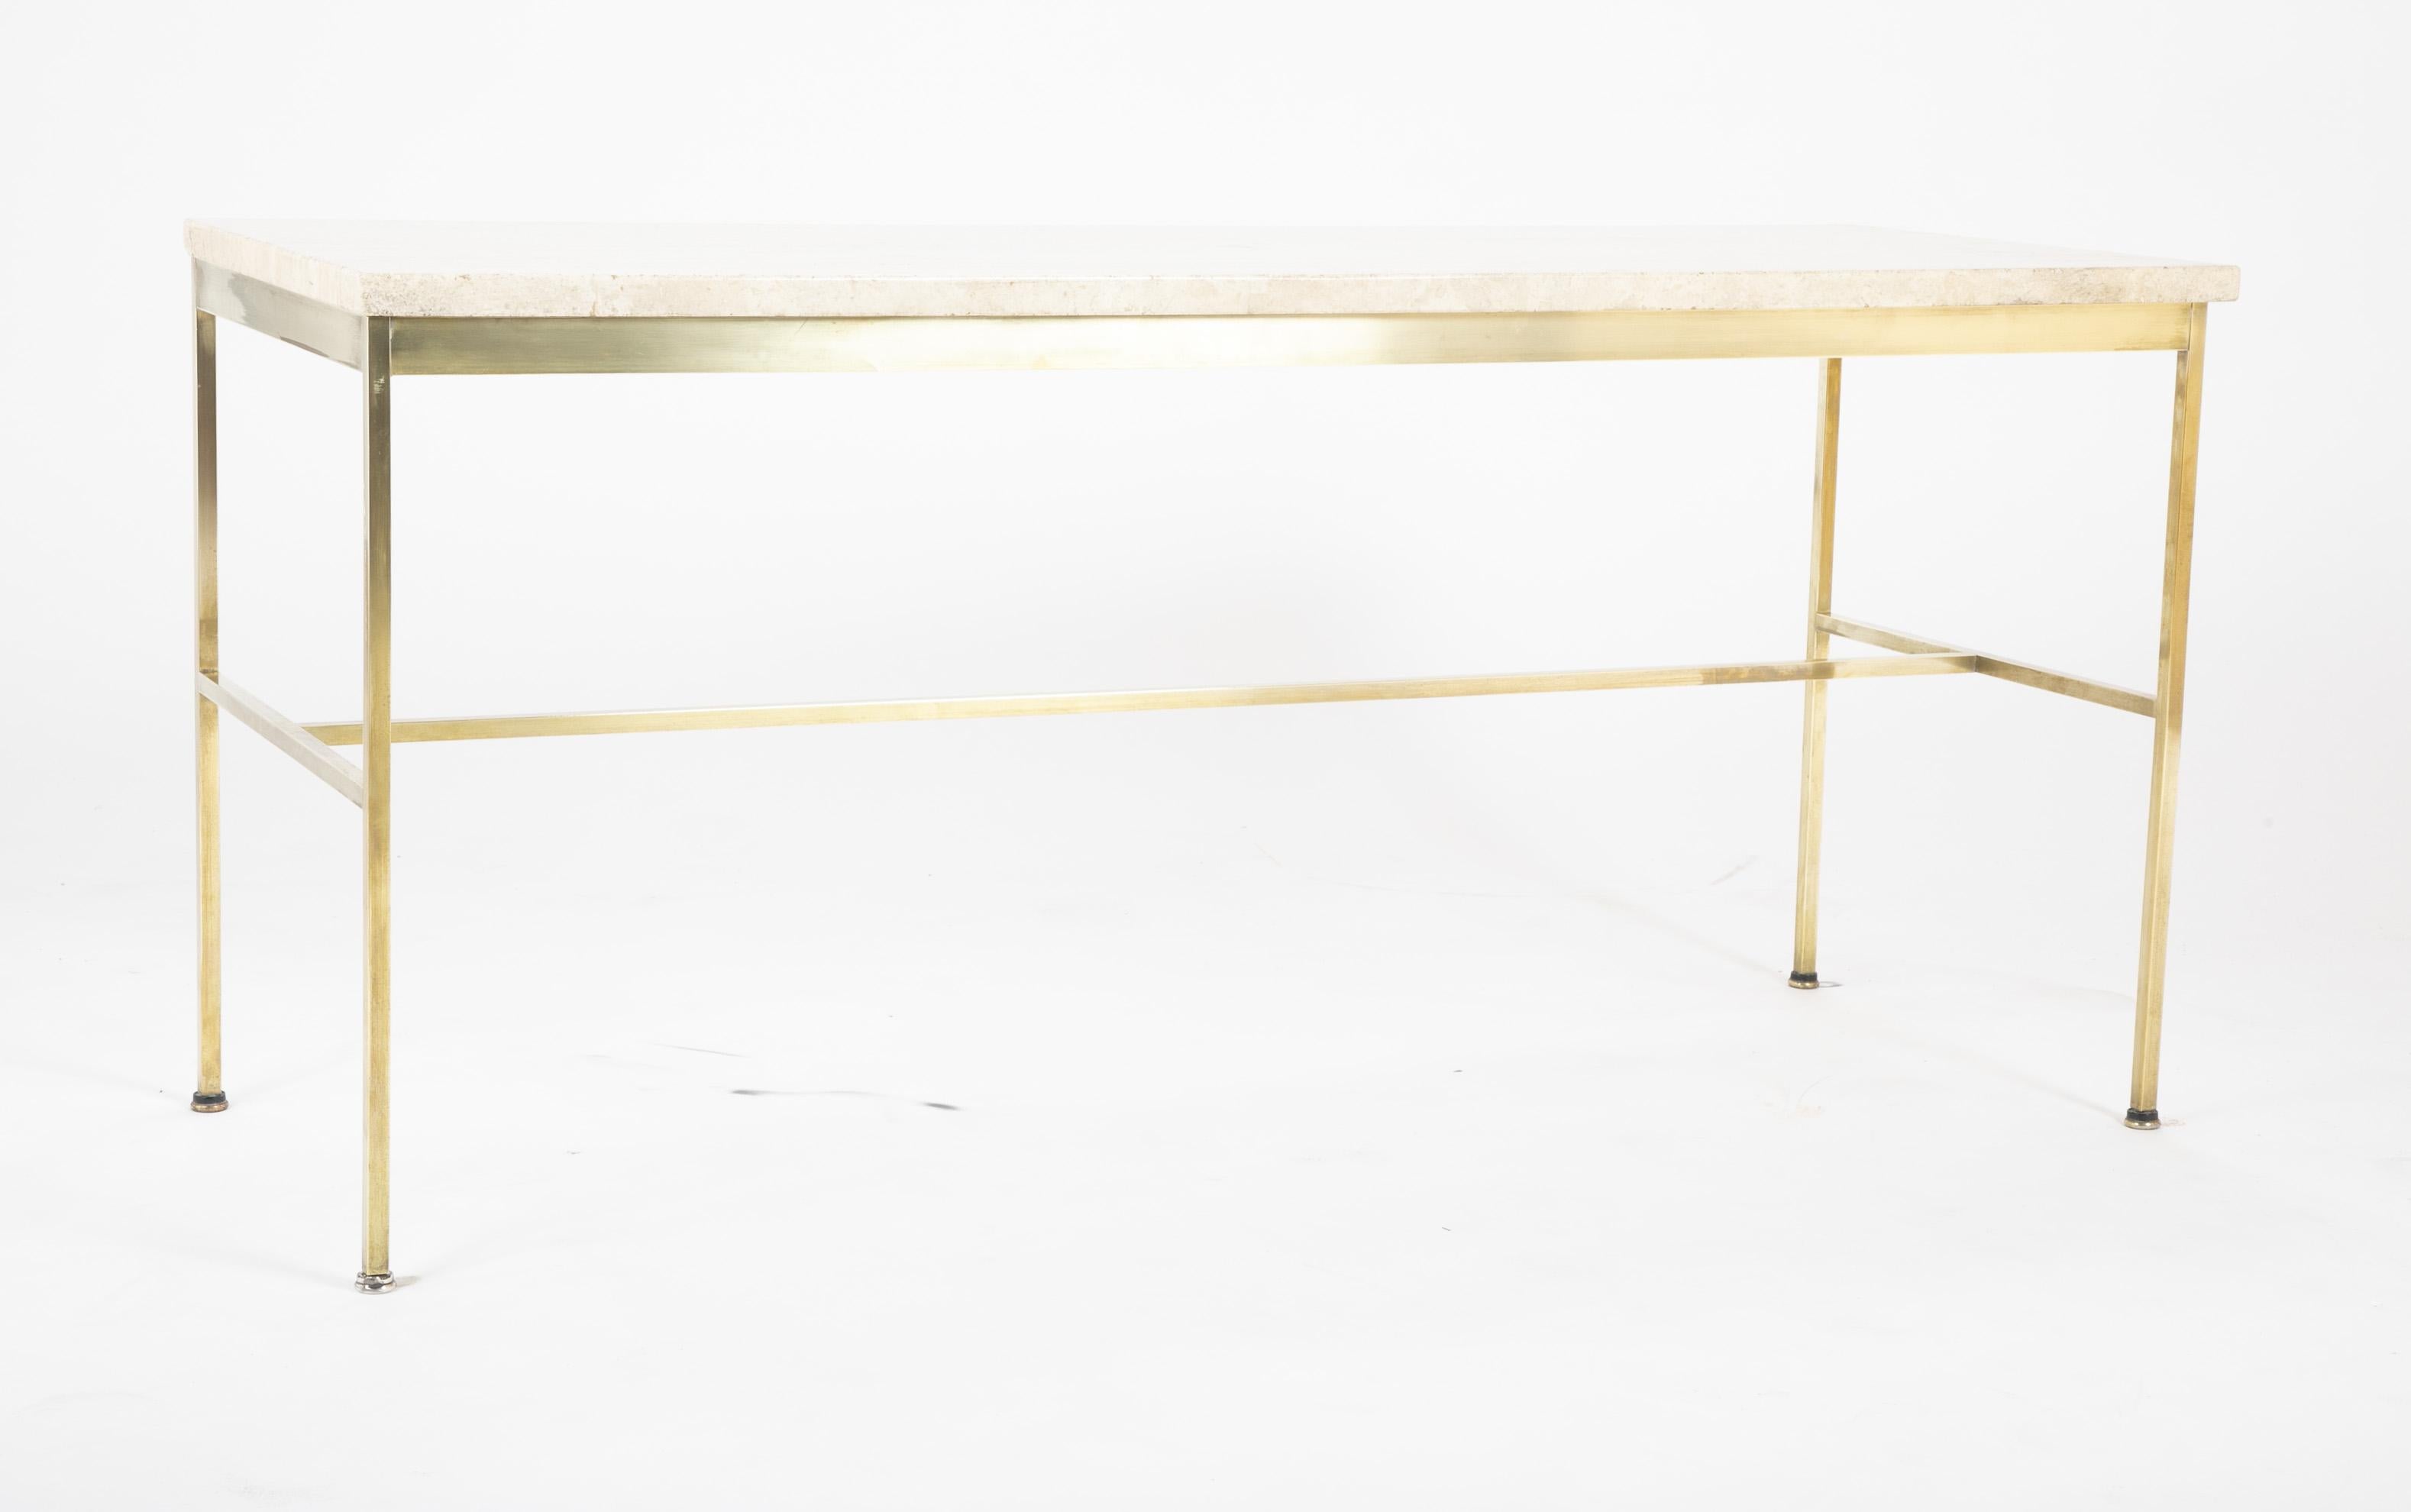 A square brass armature console table with travertine marble top designed by Paul McCobb.